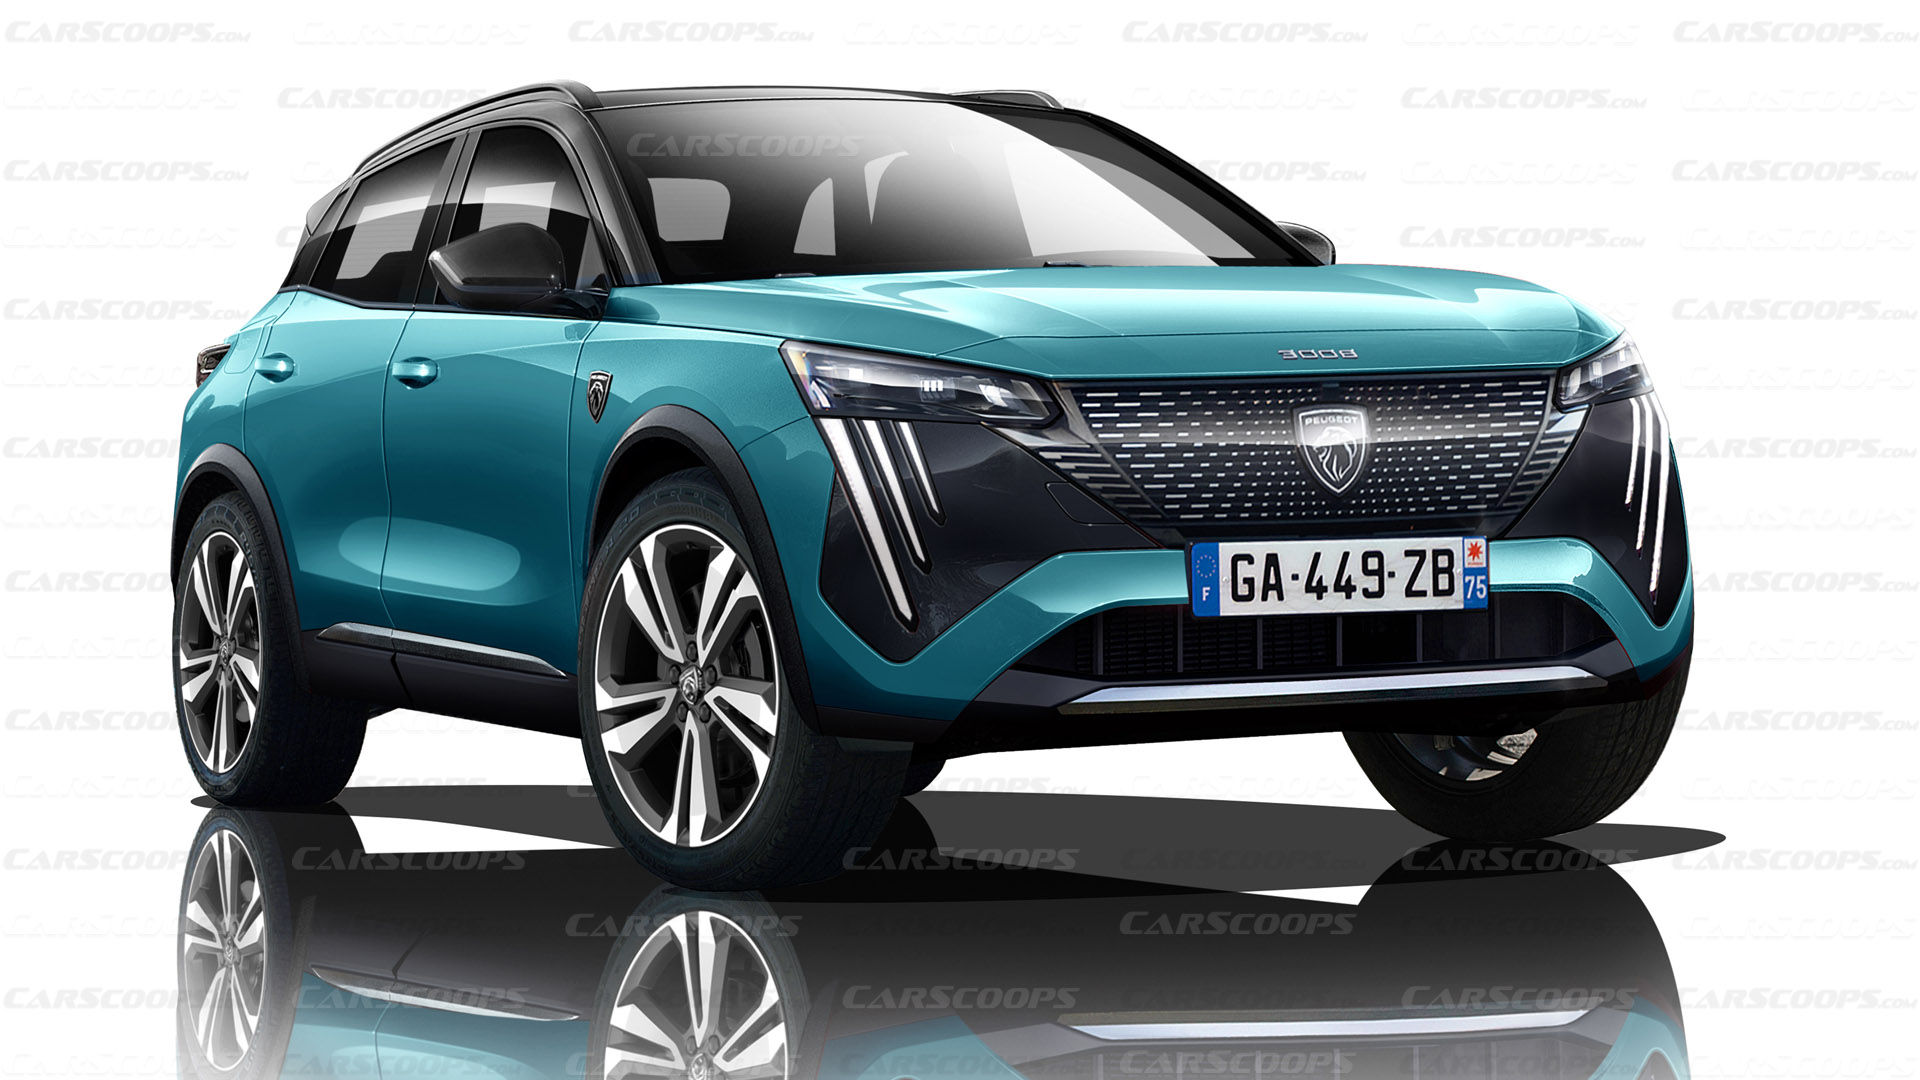 The 2023 Peugeot 3008 compact SUV is coming back